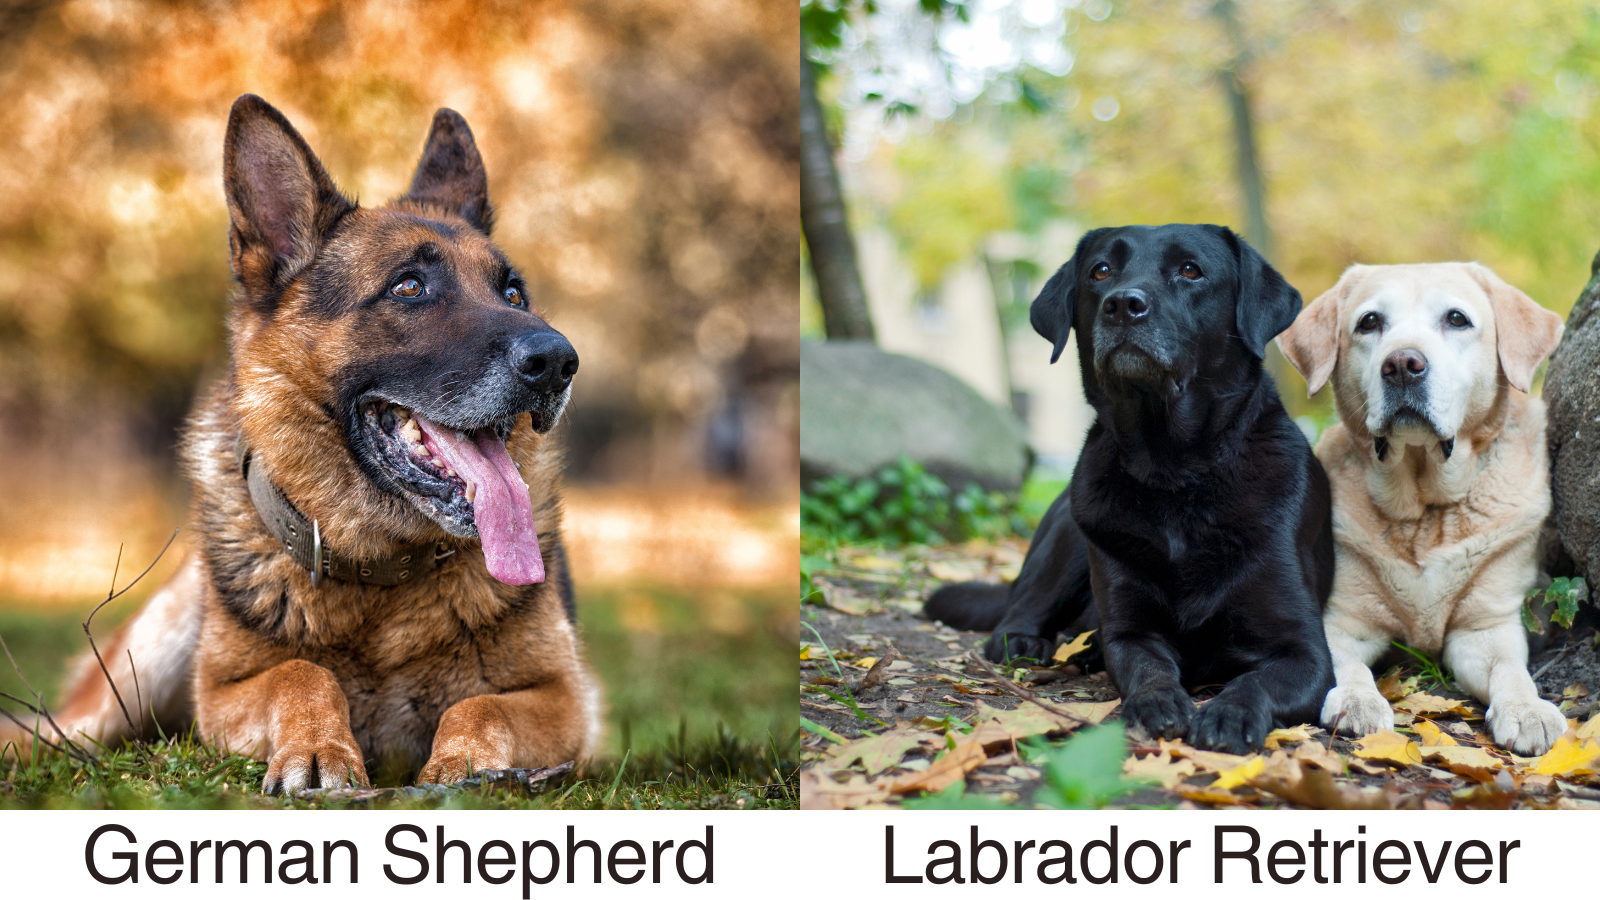 A side by side comparison of a German Shepherd and two labradors